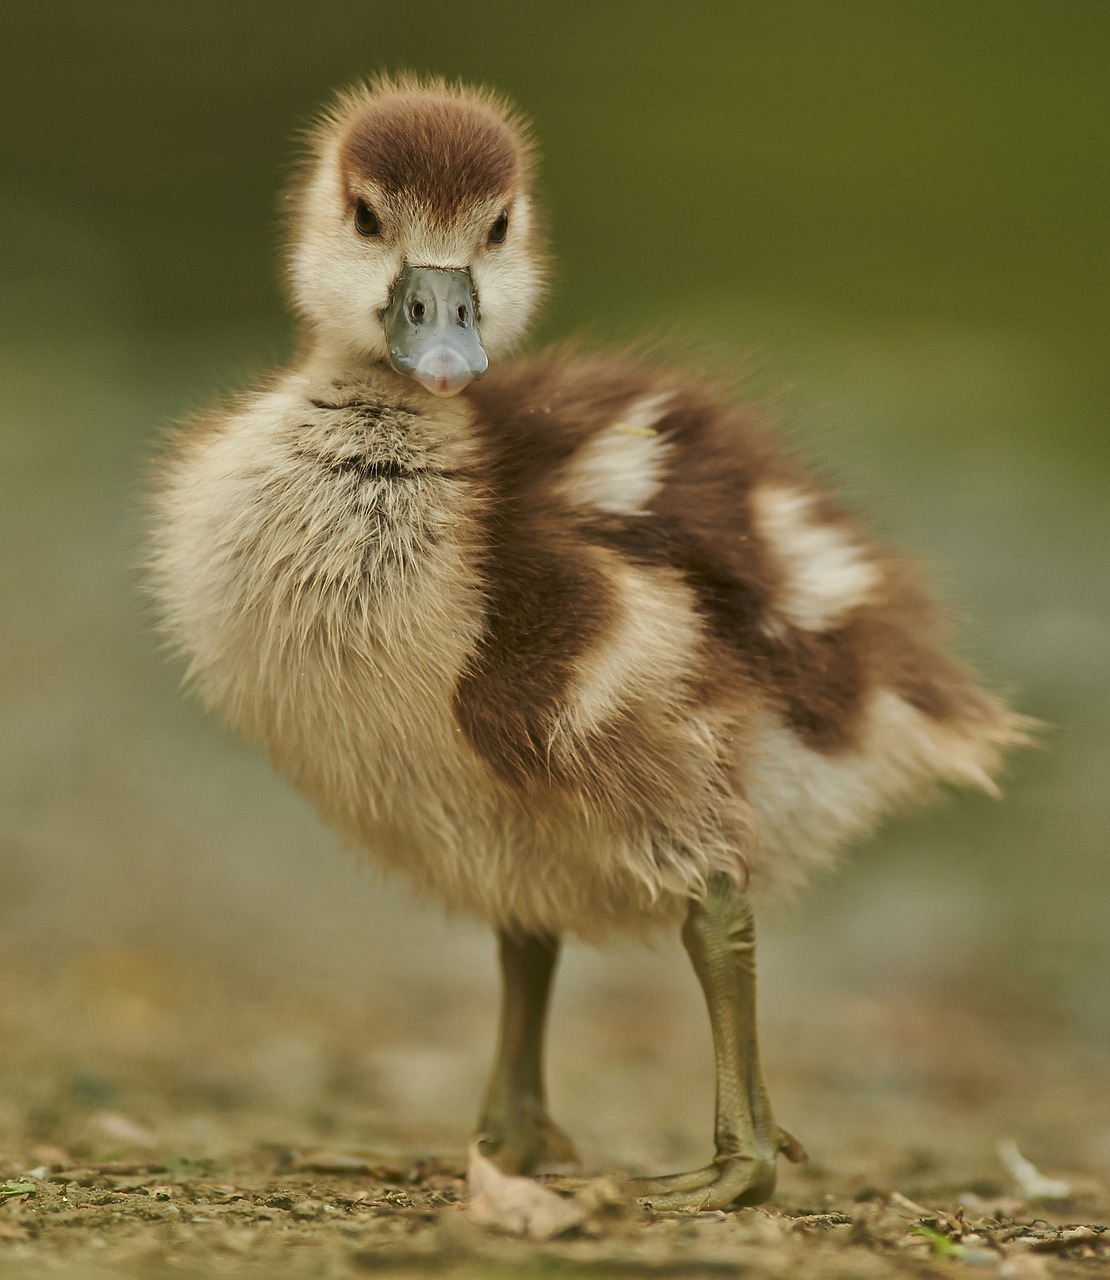 a close up of a small bird on a dirt ground, shutterstock, hurufiyya, cute goose, calf, epic stance, high res photo